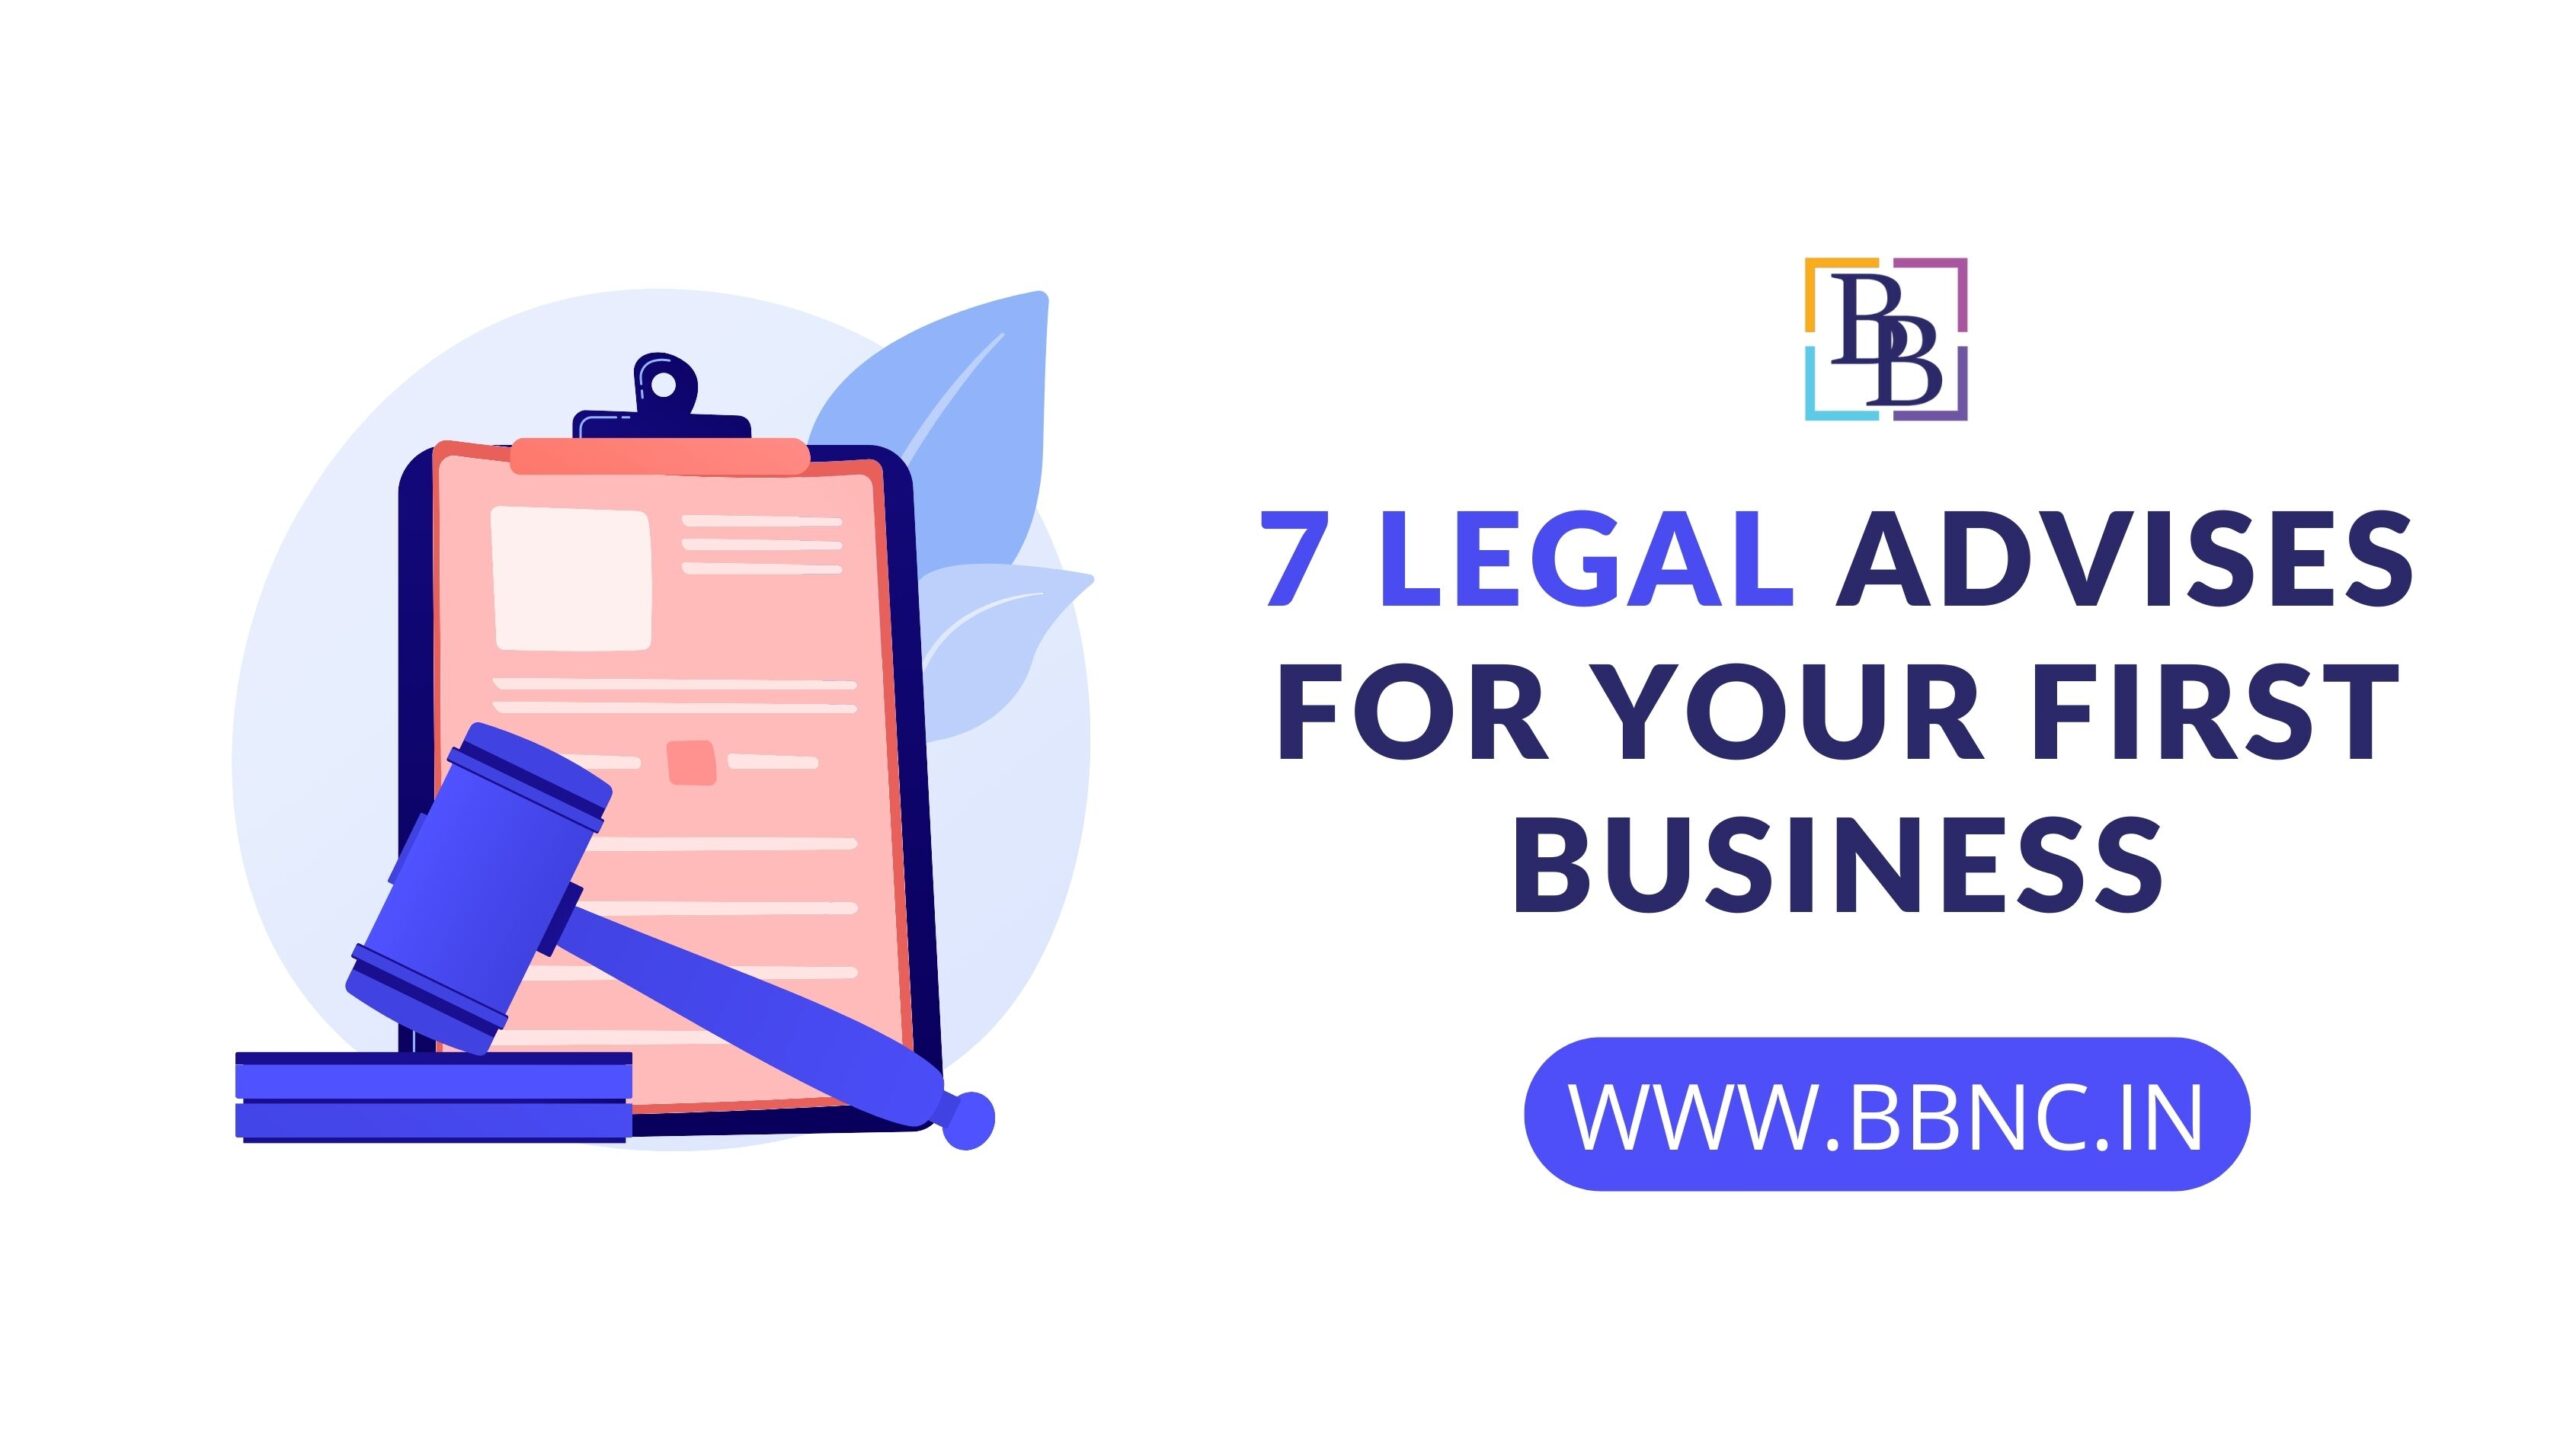 7 Legal Advise for your first business.